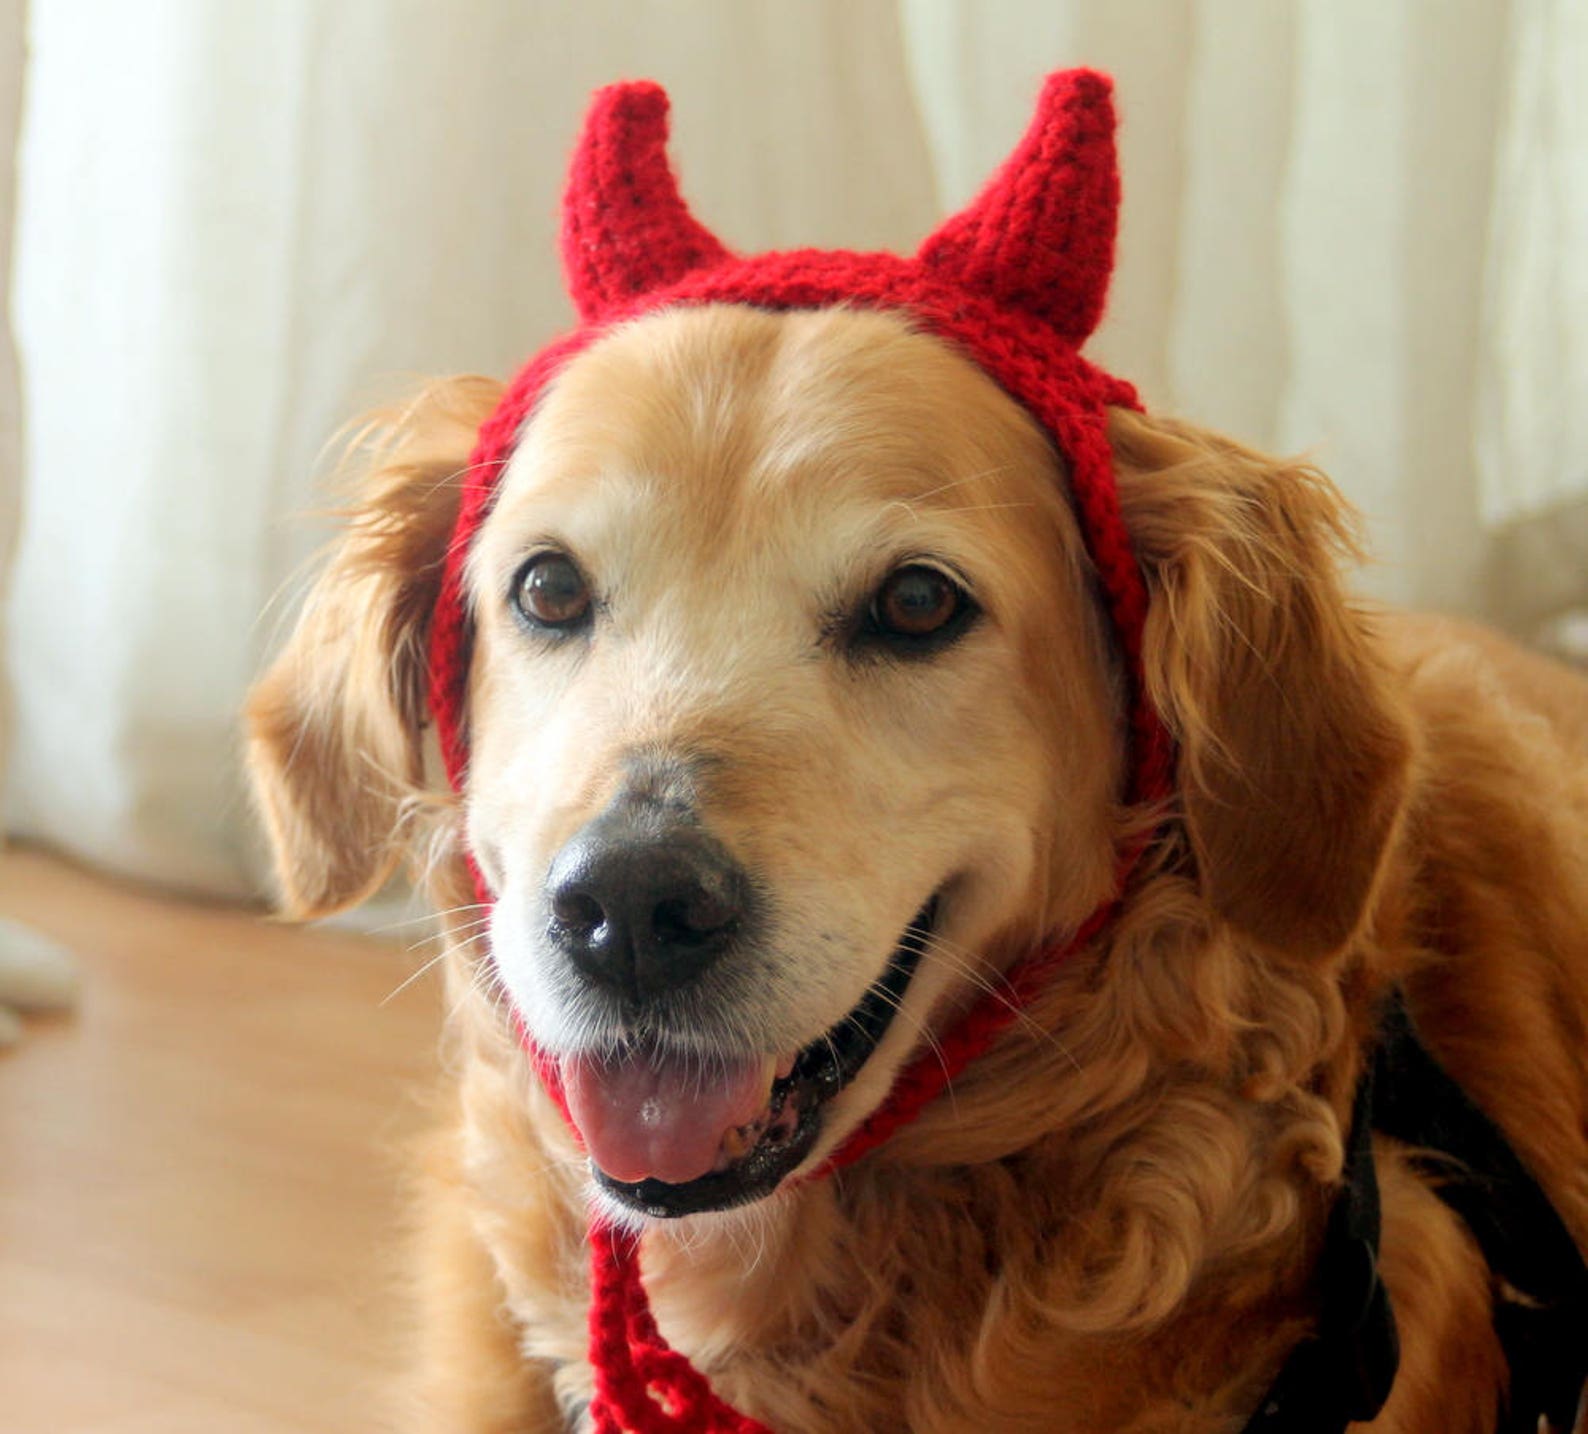 DIY dog costumes: interesting ideas you must try